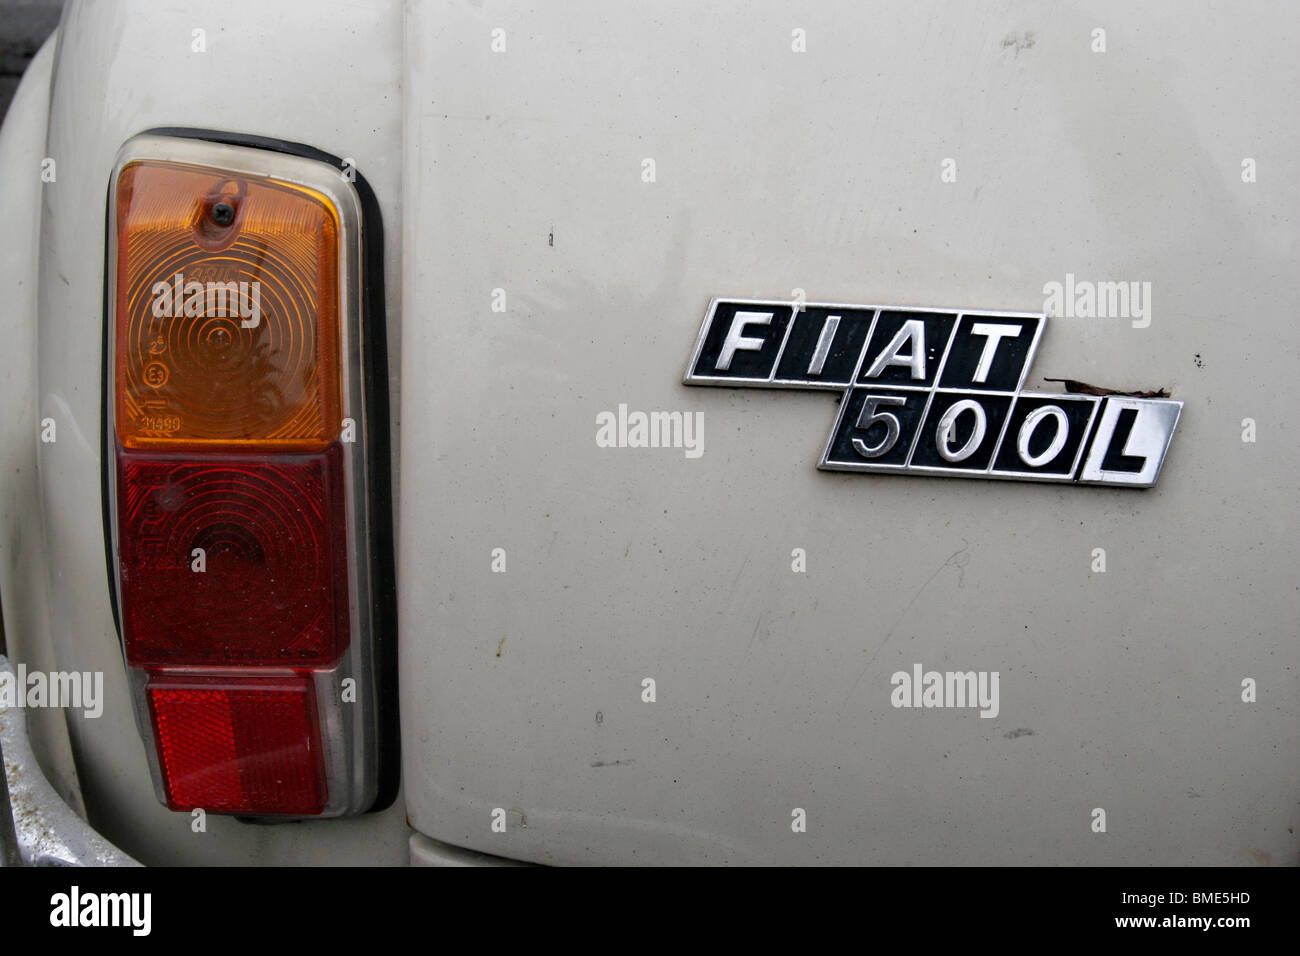 Spot on Fiat 500, old vintage car made in Italy.. Stock Photo